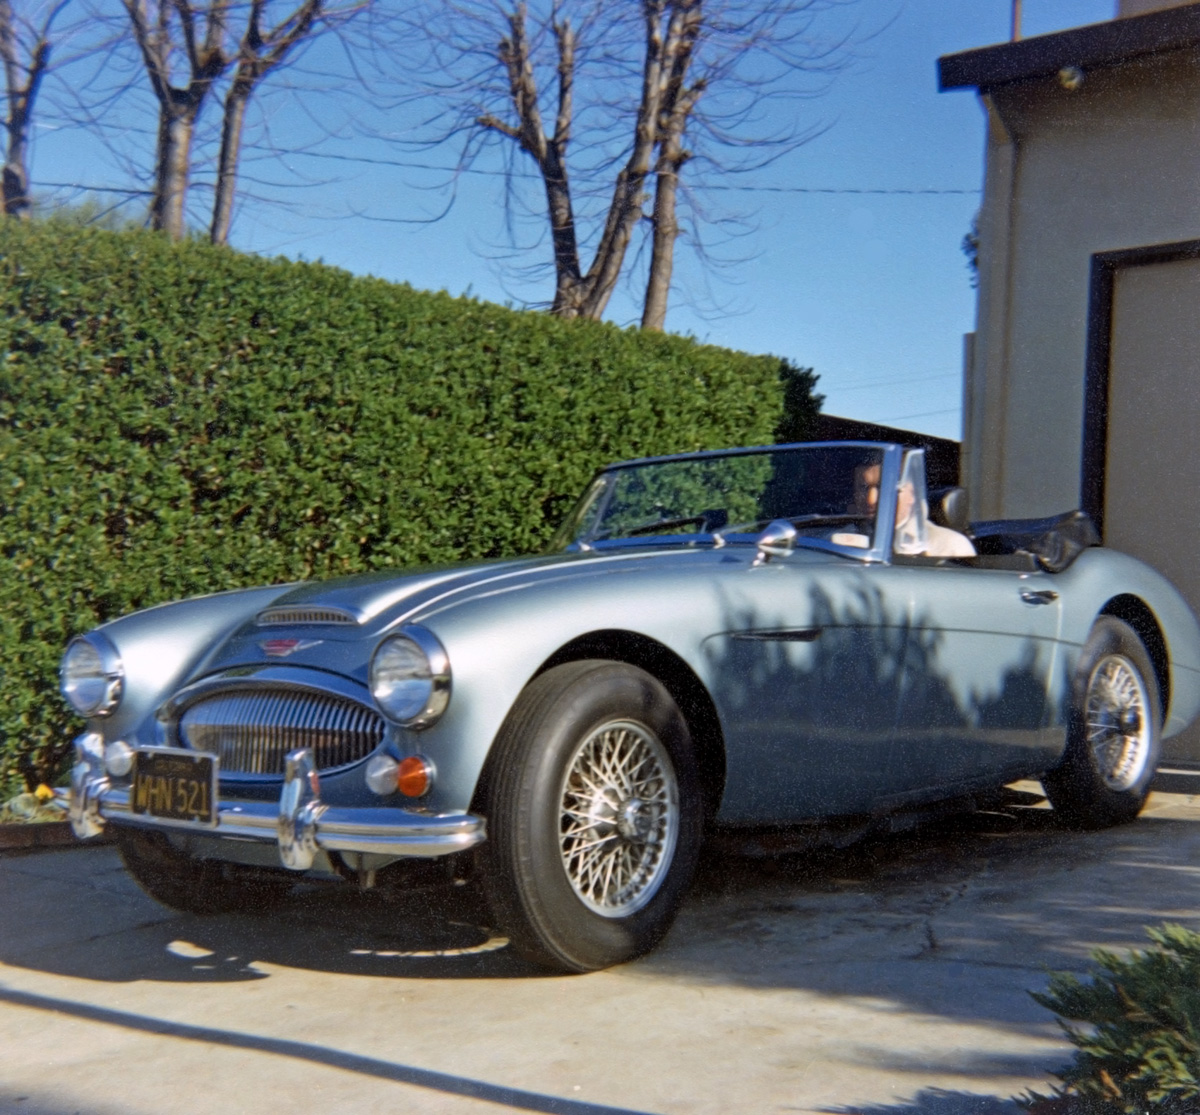 Another photo of my dad with his new '67 Austin Healey 3000 in early 1968. He was a newspaper reporter and he has his "Murrow" London Fog trench coat on for the chilly top-down morning drive to Oakland (S.F. Bay Area). He made a small sticker with a label maker (remember those?) that said, "Disraeli Rides Again!" and it was applied on the inside of the glove box door. View full size.